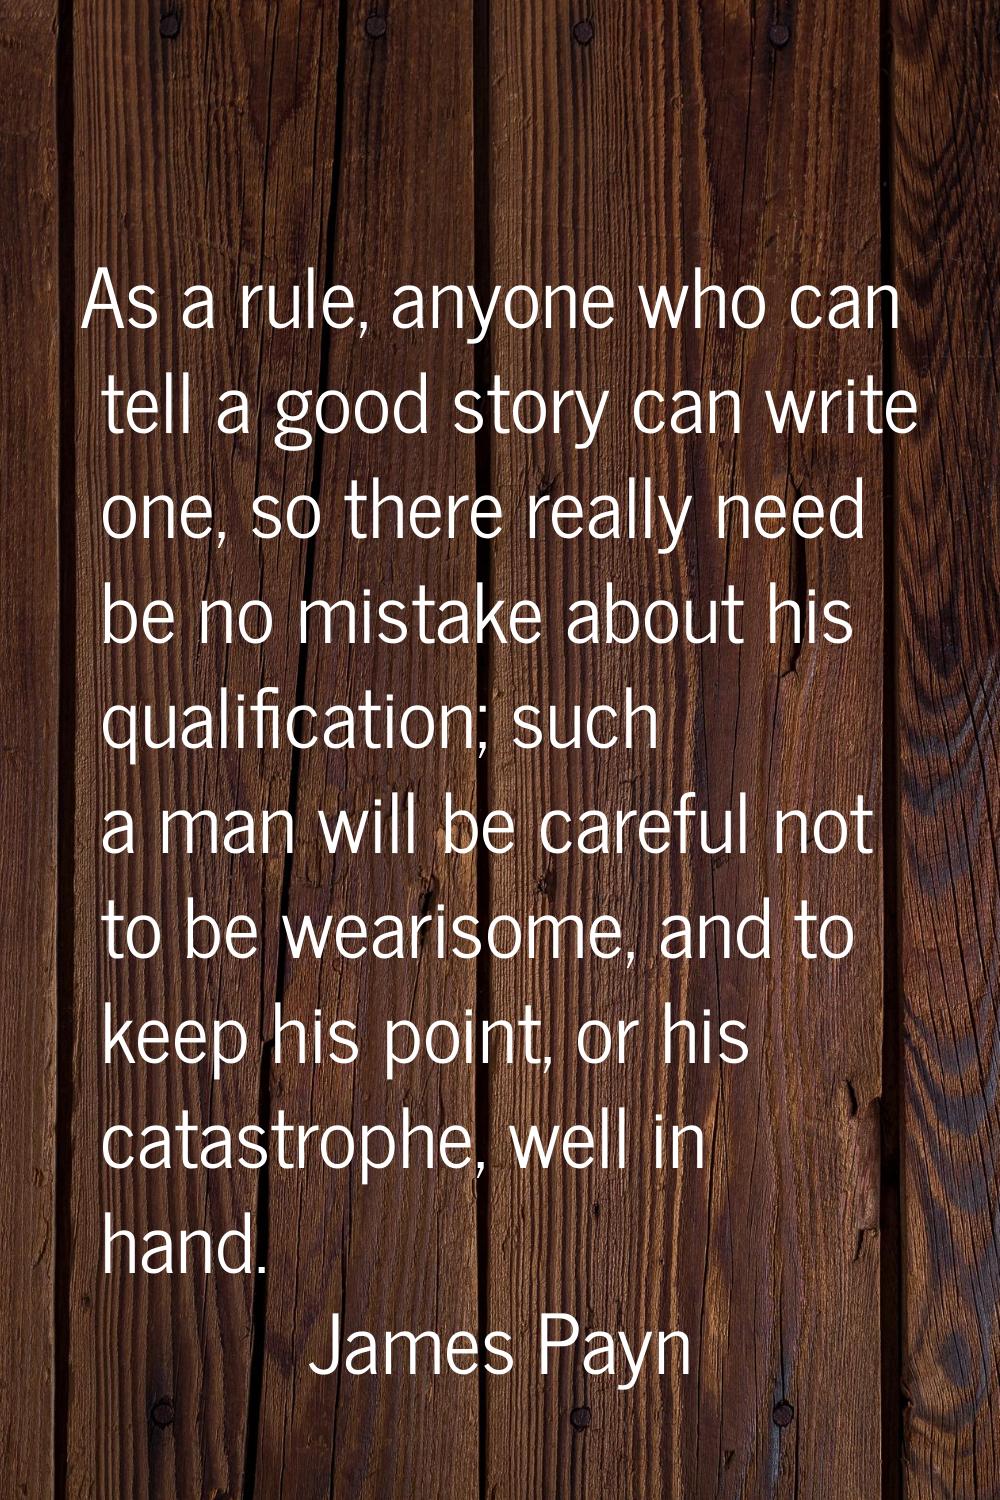 As a rule, anyone who can tell a good story can write one, so there really need be no mistake about